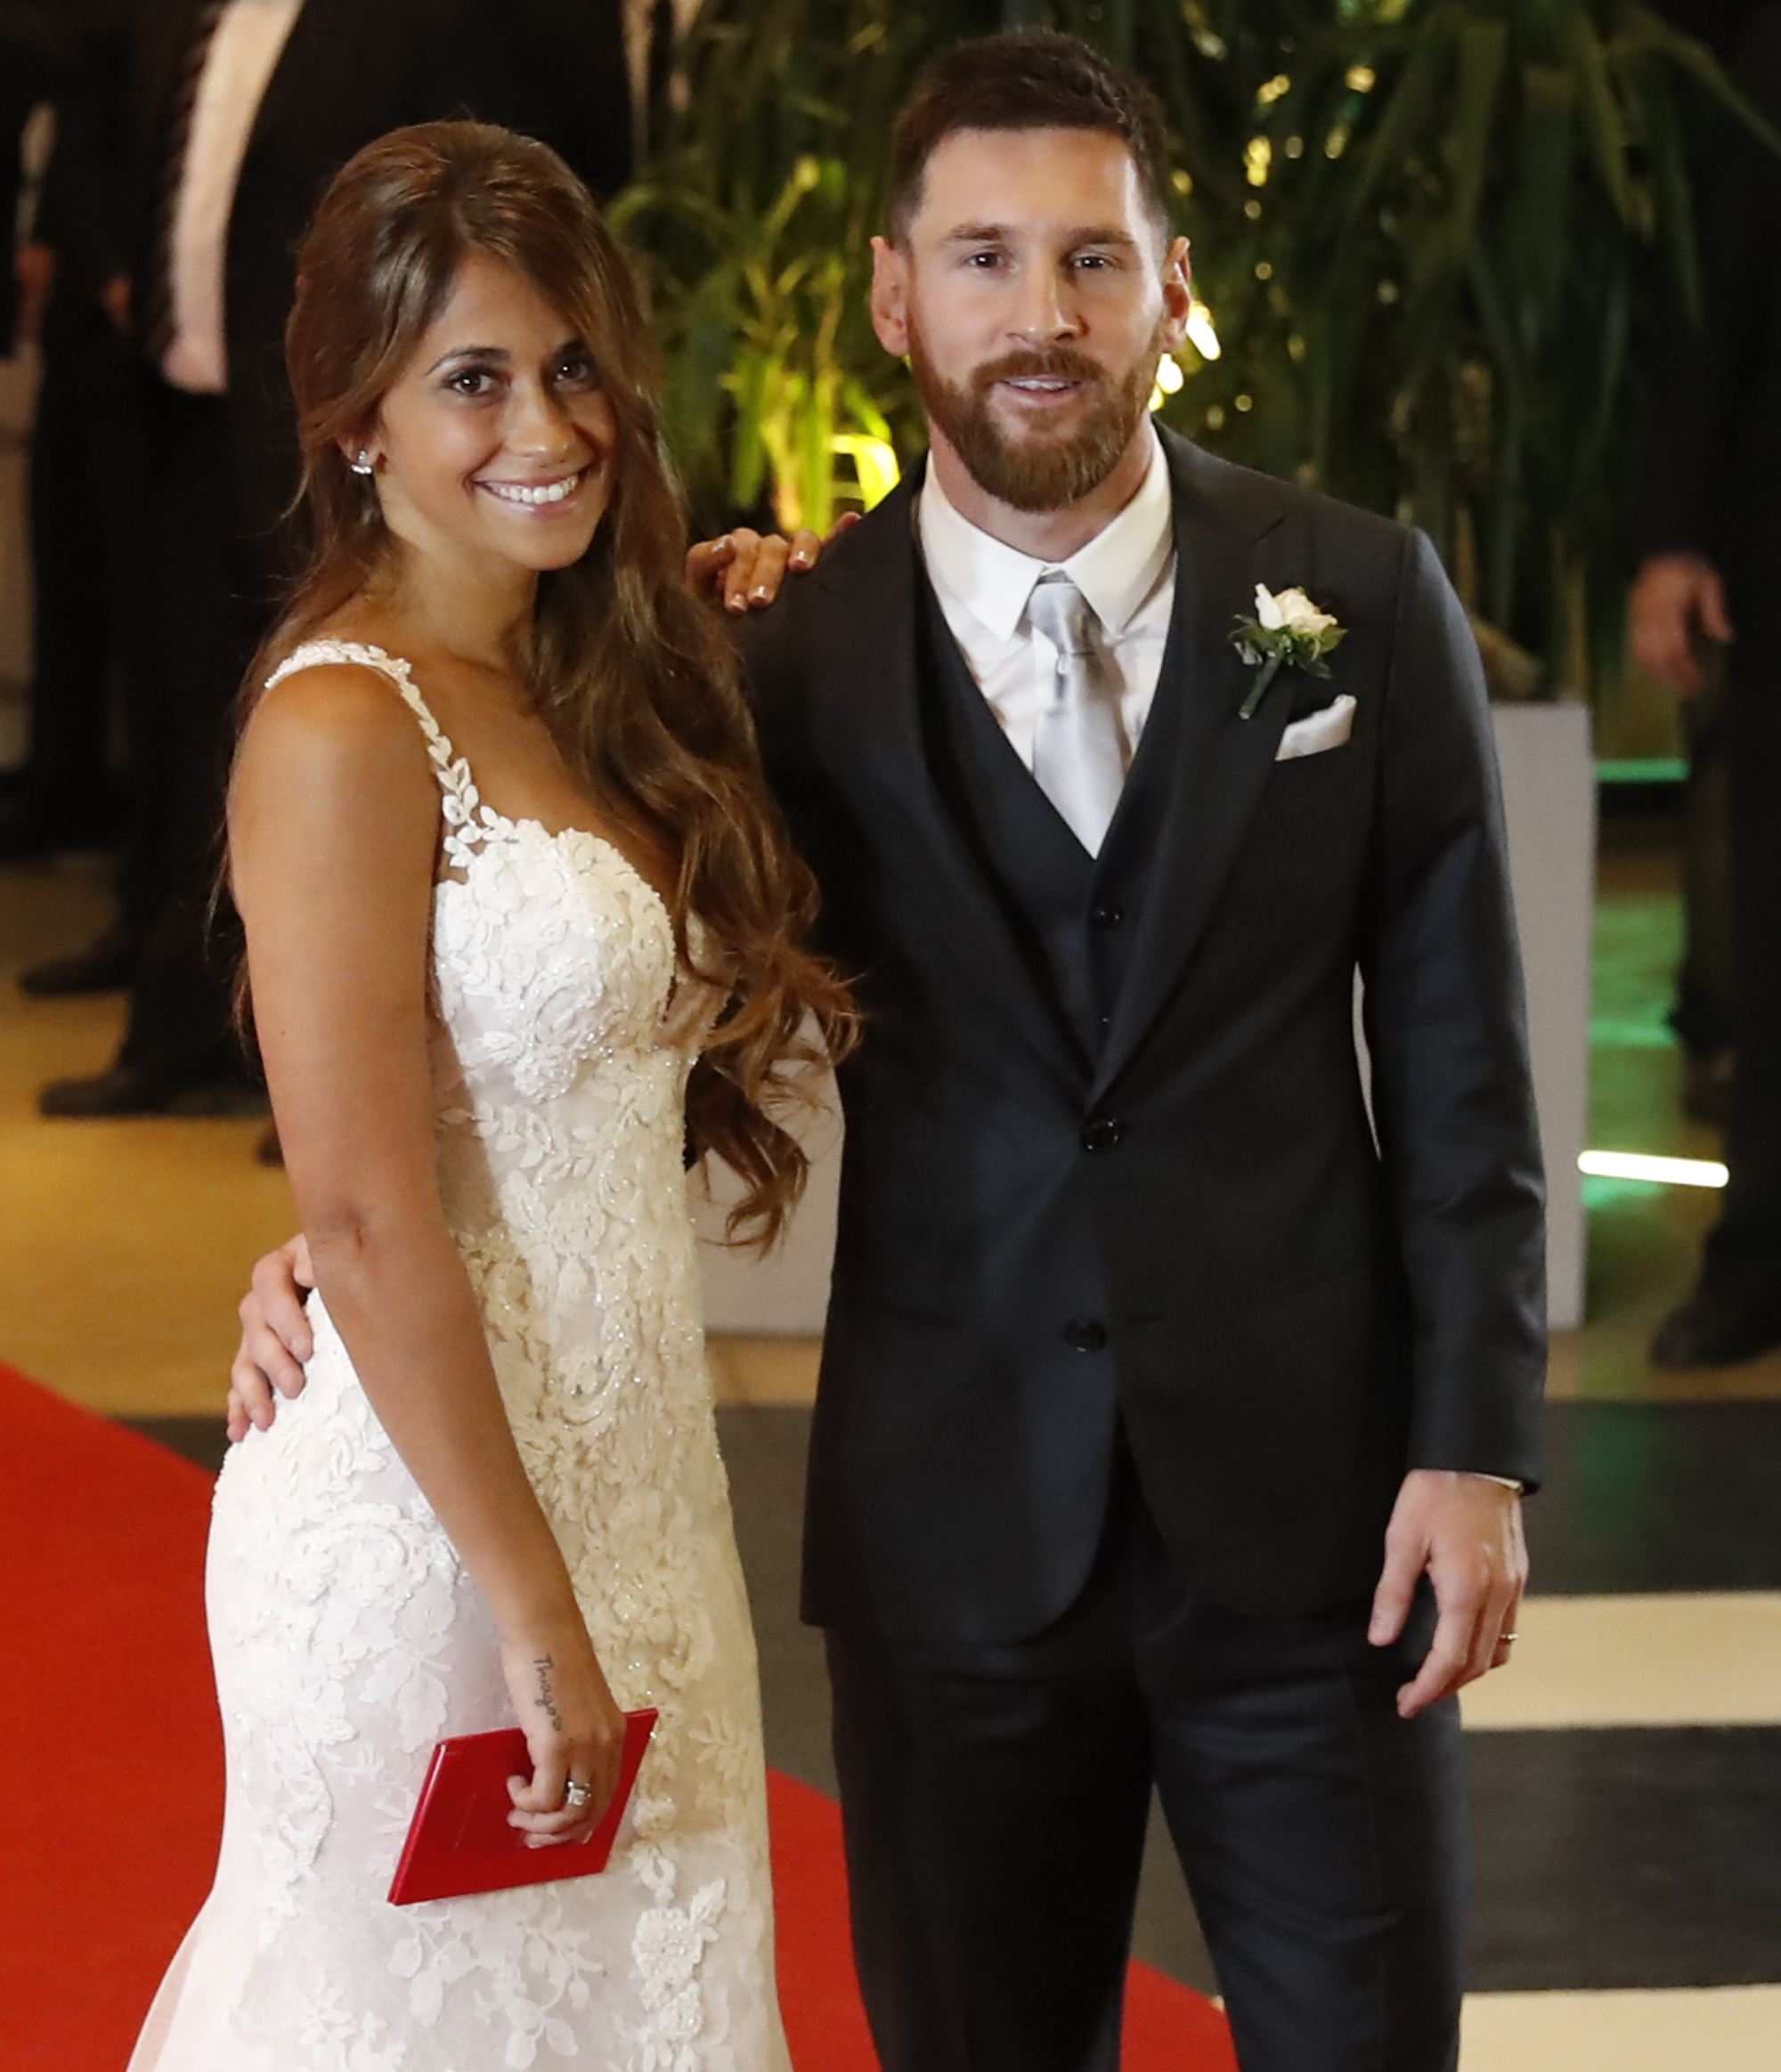 Who Is Lionel Messi’s Gorgeous Fashionista Wife Antonela Roccuzzo The 2022 World Cup Champ And